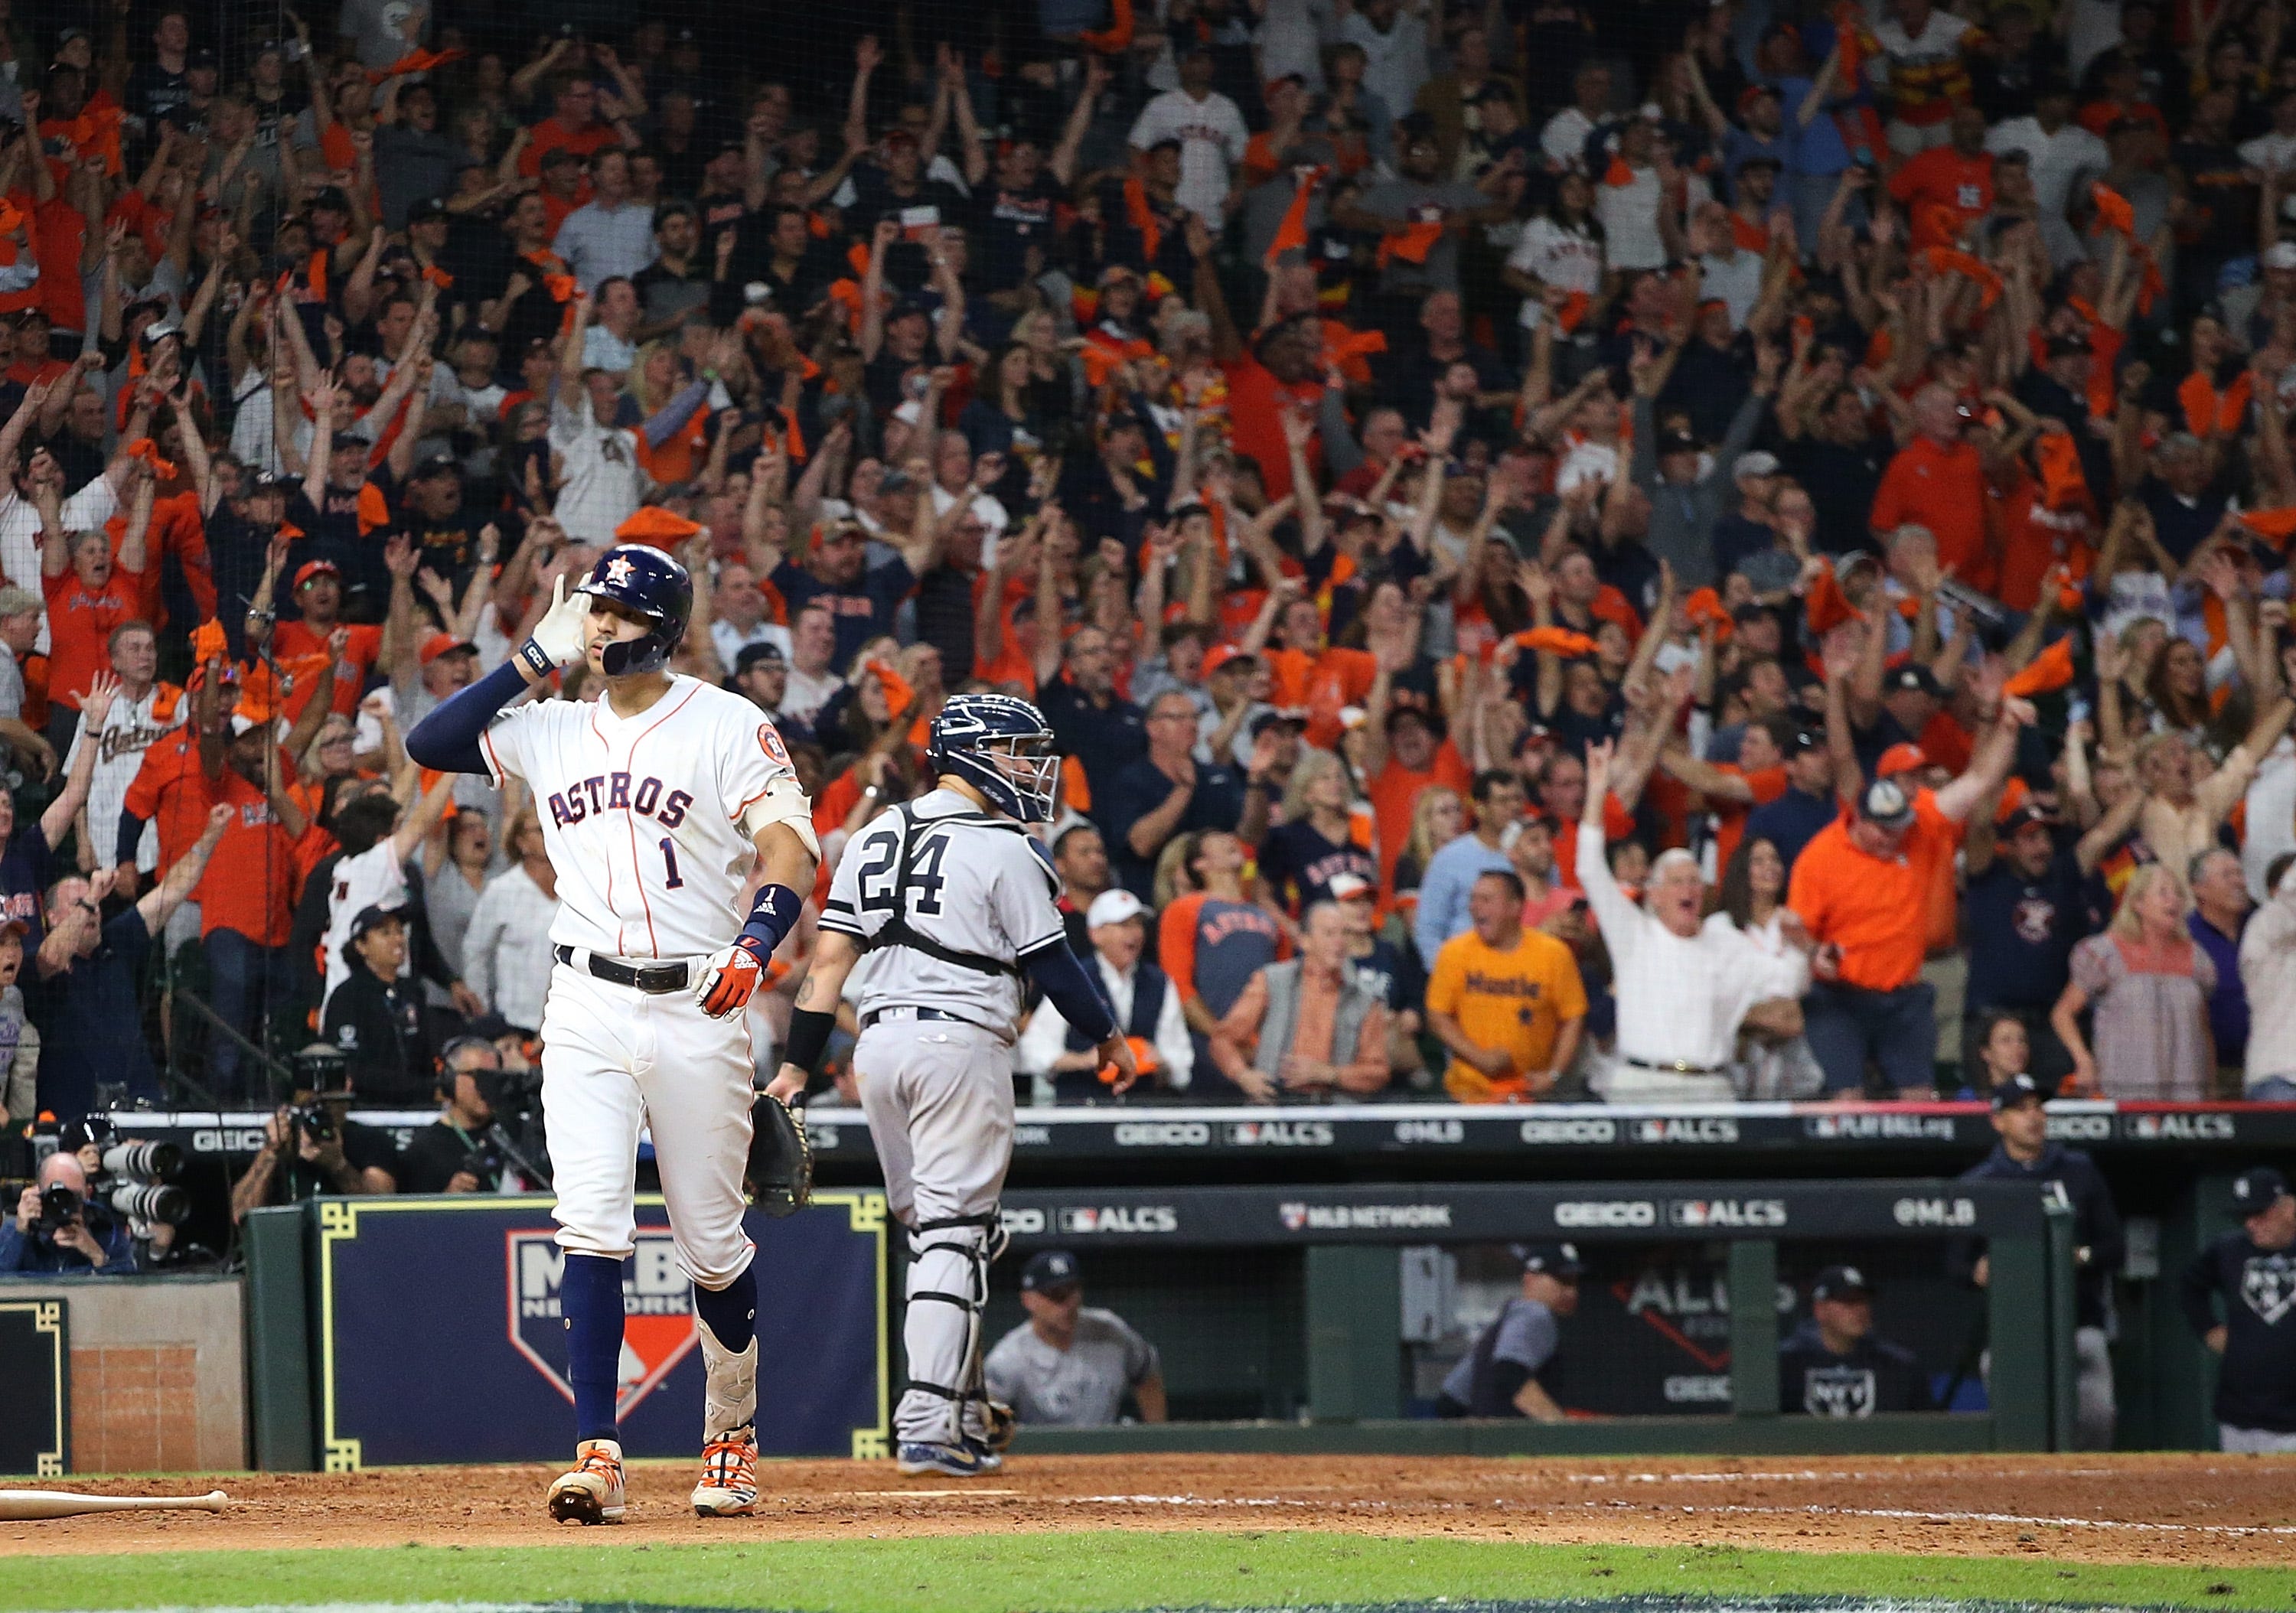 'I don’t even know what I did': Carlos Correa lost his mind while saving Astros' season